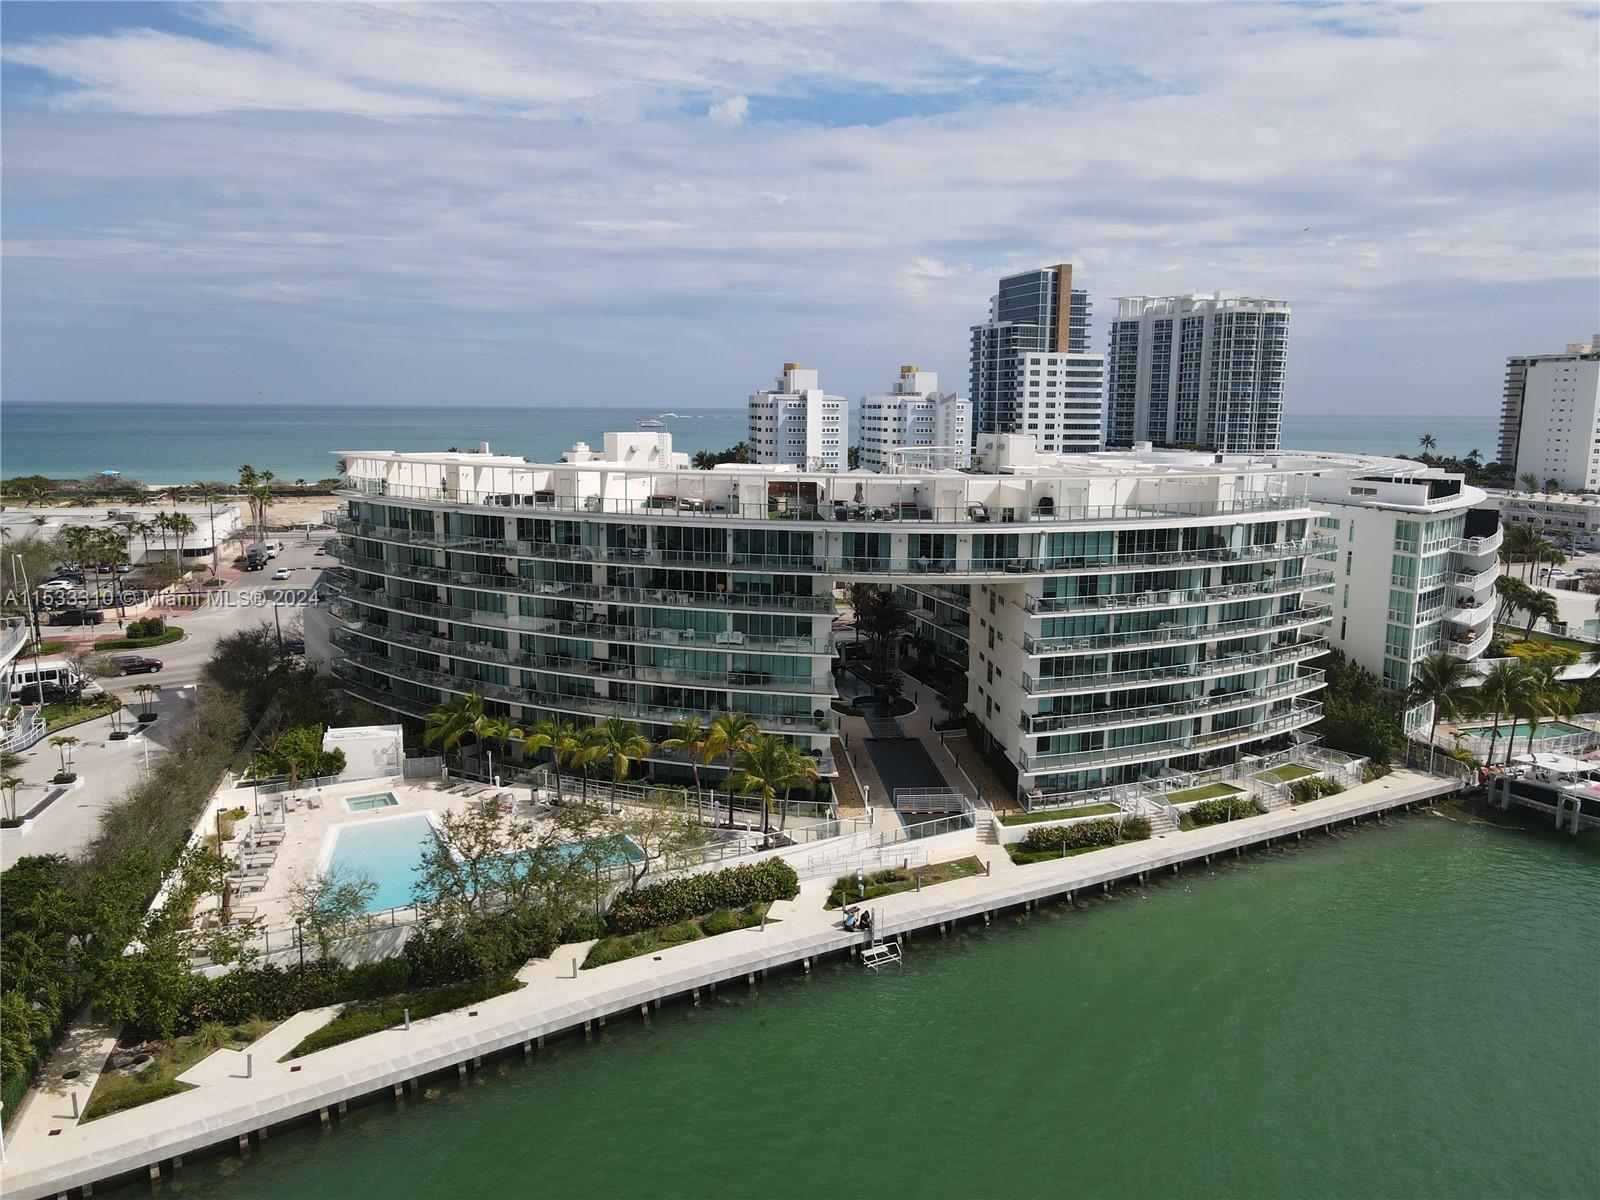 Beautiful penthouse located steps away from the beach .This unit has 3Bedrooms and 3.5 Baths with a nice Intracoastal view. The unit offers high end appliances , featuring a aprox. 920 SF rooftop terrace with a bathtub . Multiple  amenities like  rooftop terraces , fitness center,  business center, sauna, & 24/7 concierge.